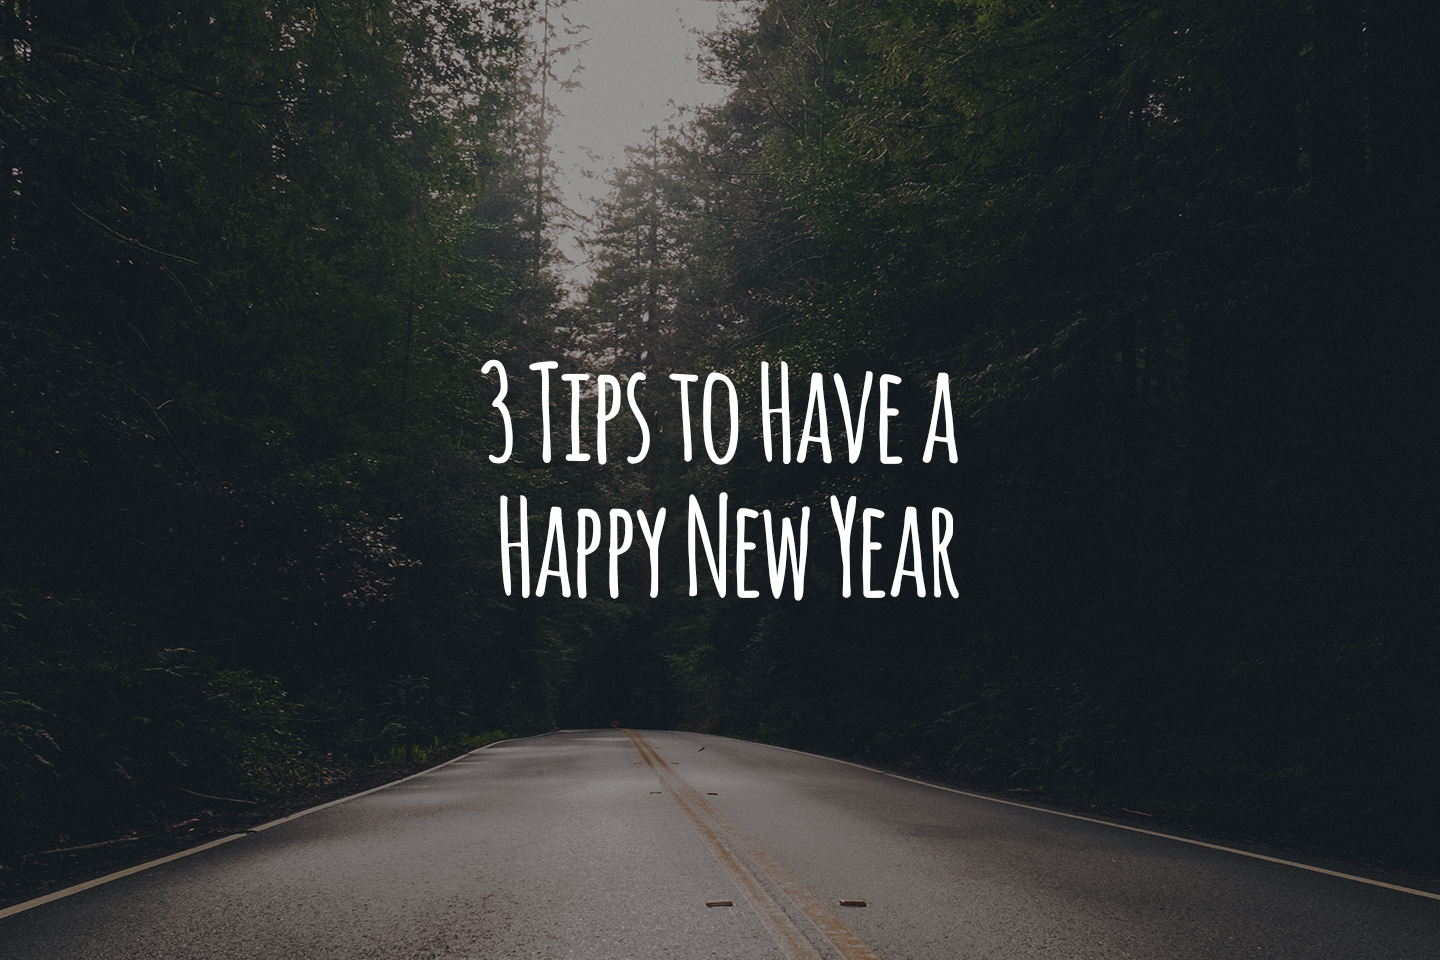 3 Tips to Have a Happy New Year